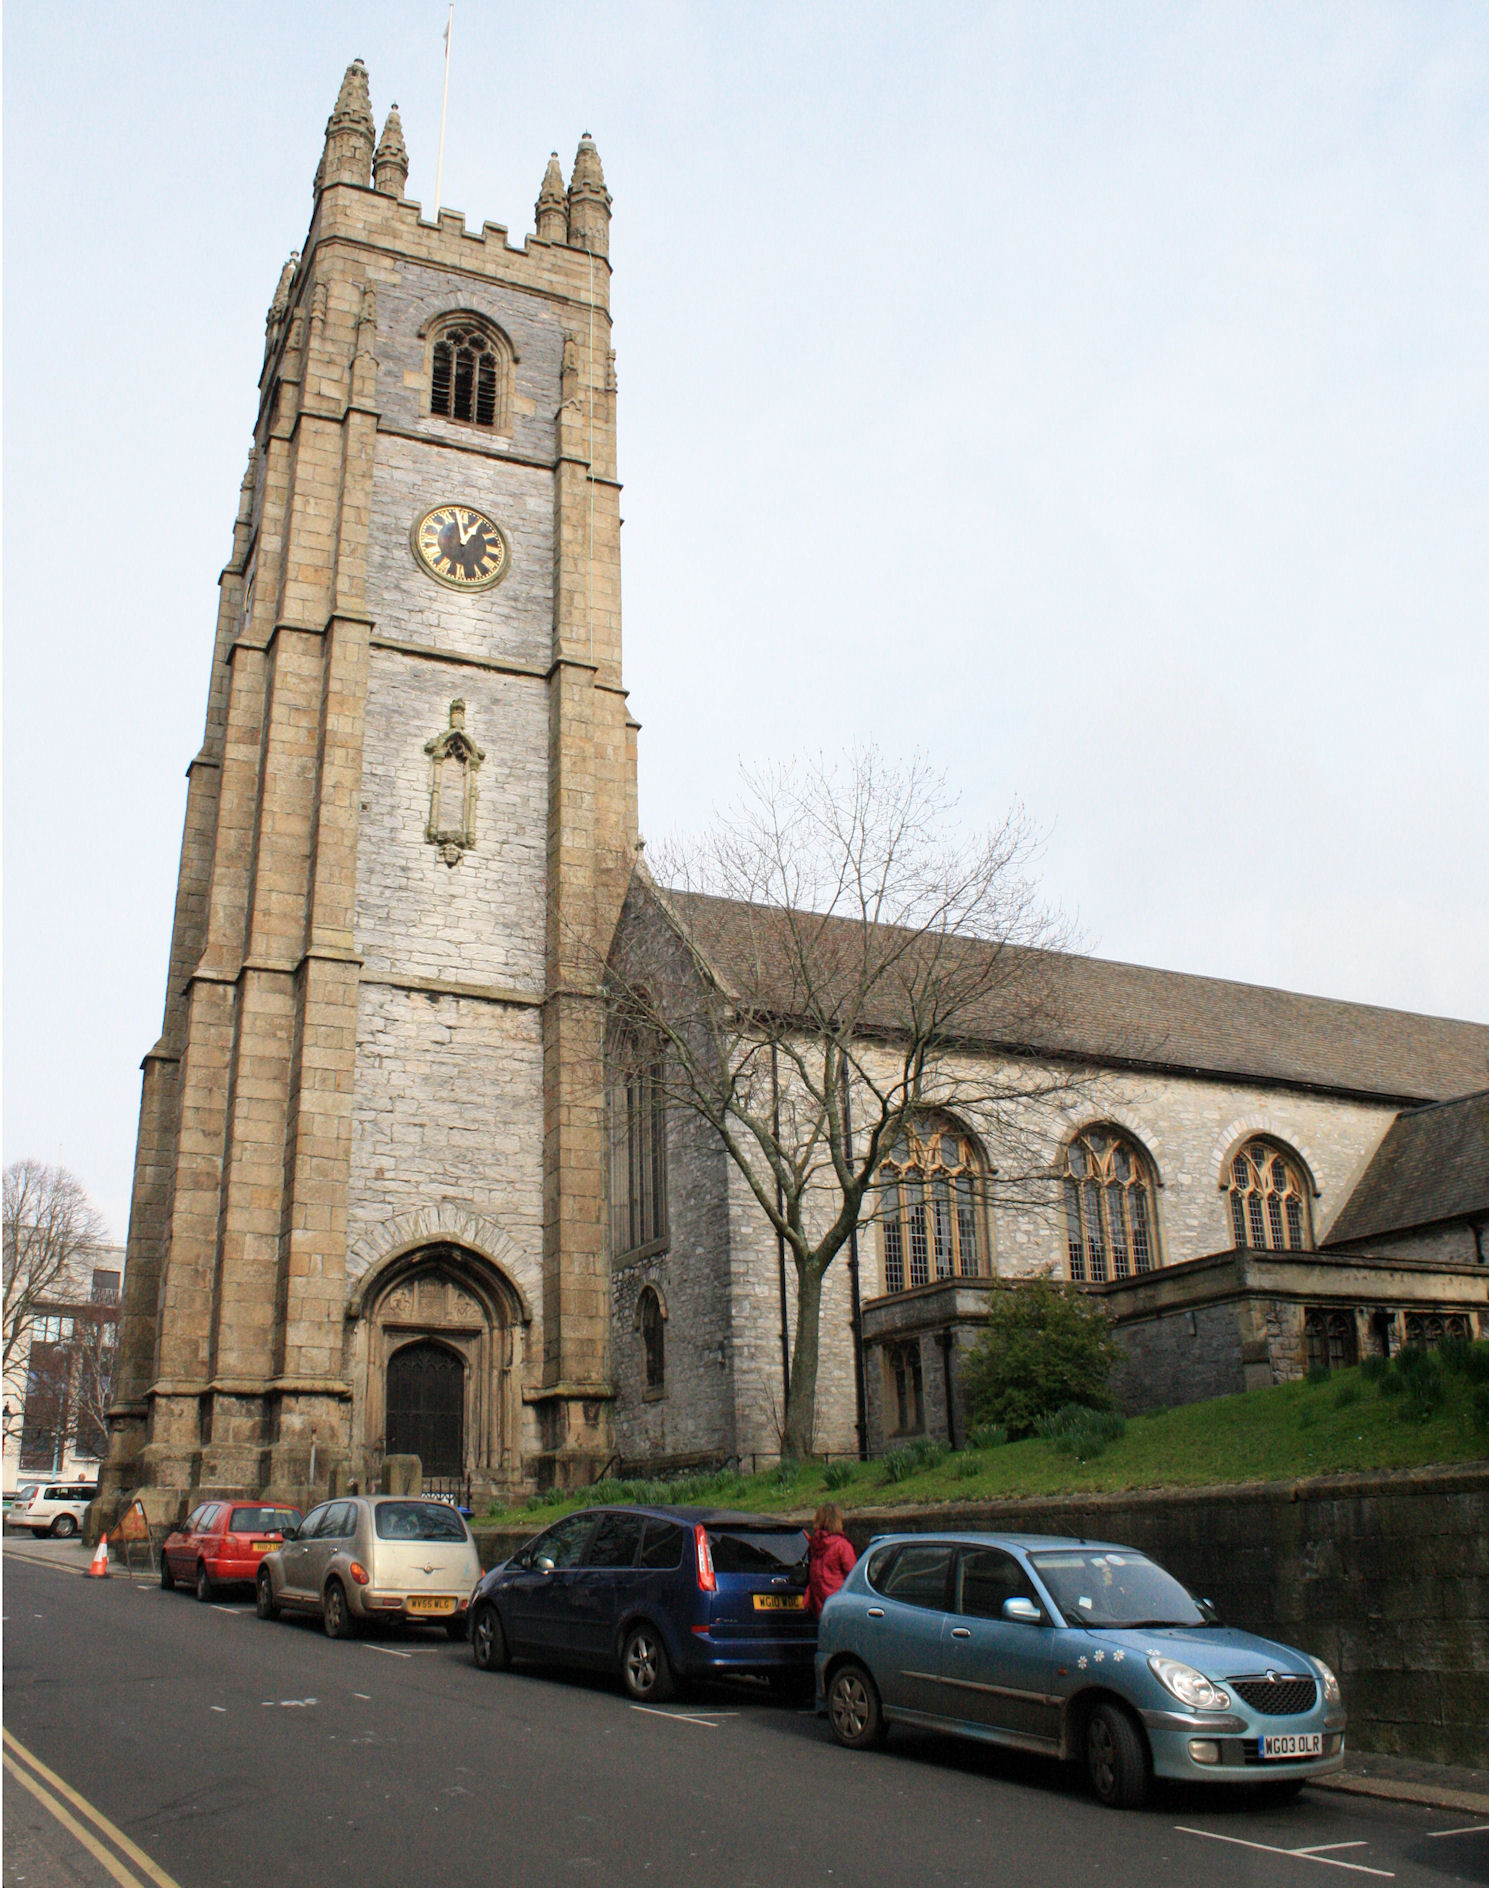 some cars are parked in front of a large church